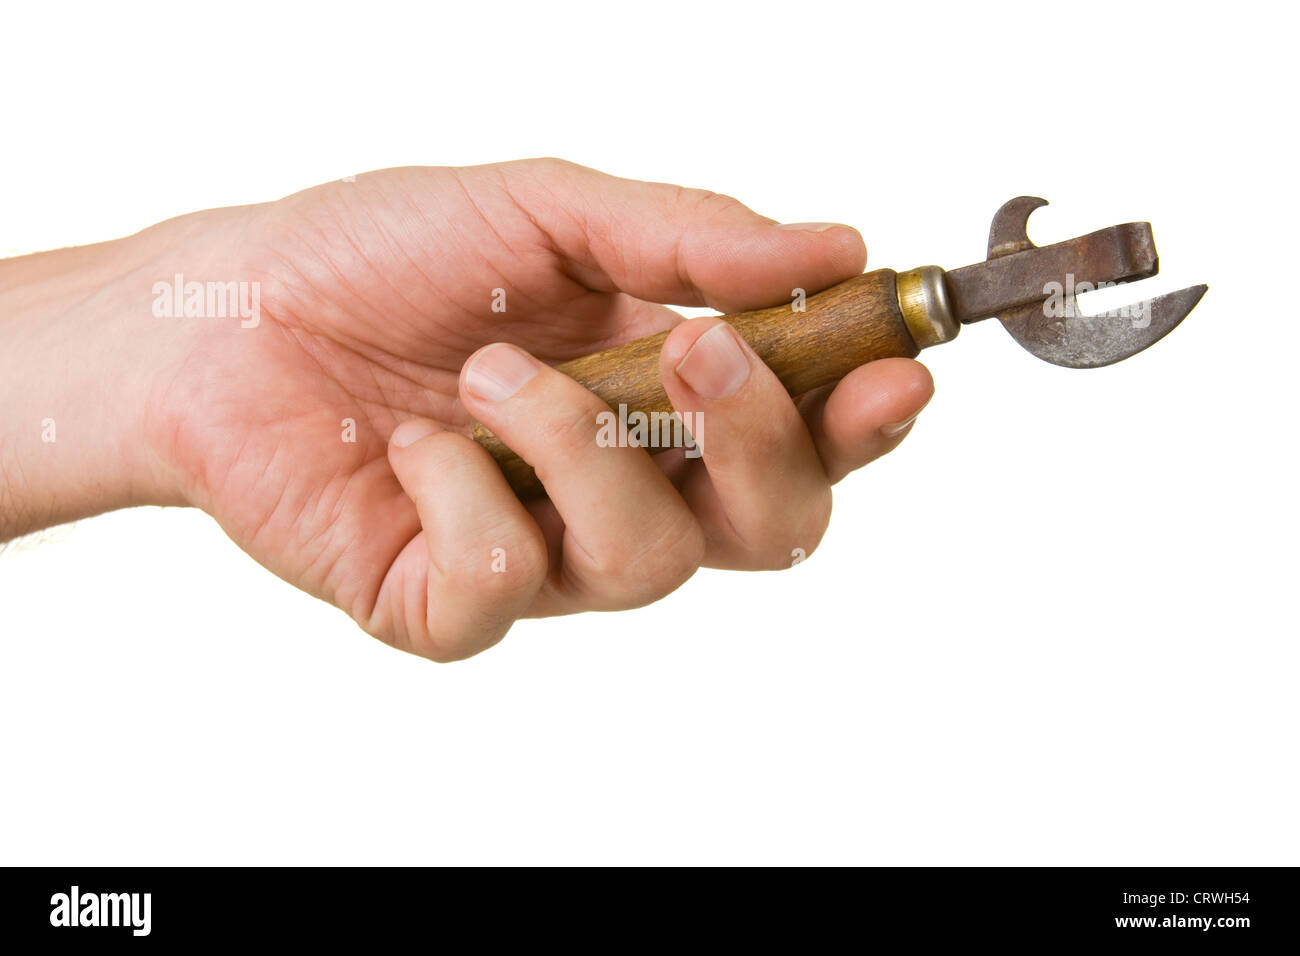 Can opener vintage Stock Photo by ©blacklionder@gmail.com 89515880